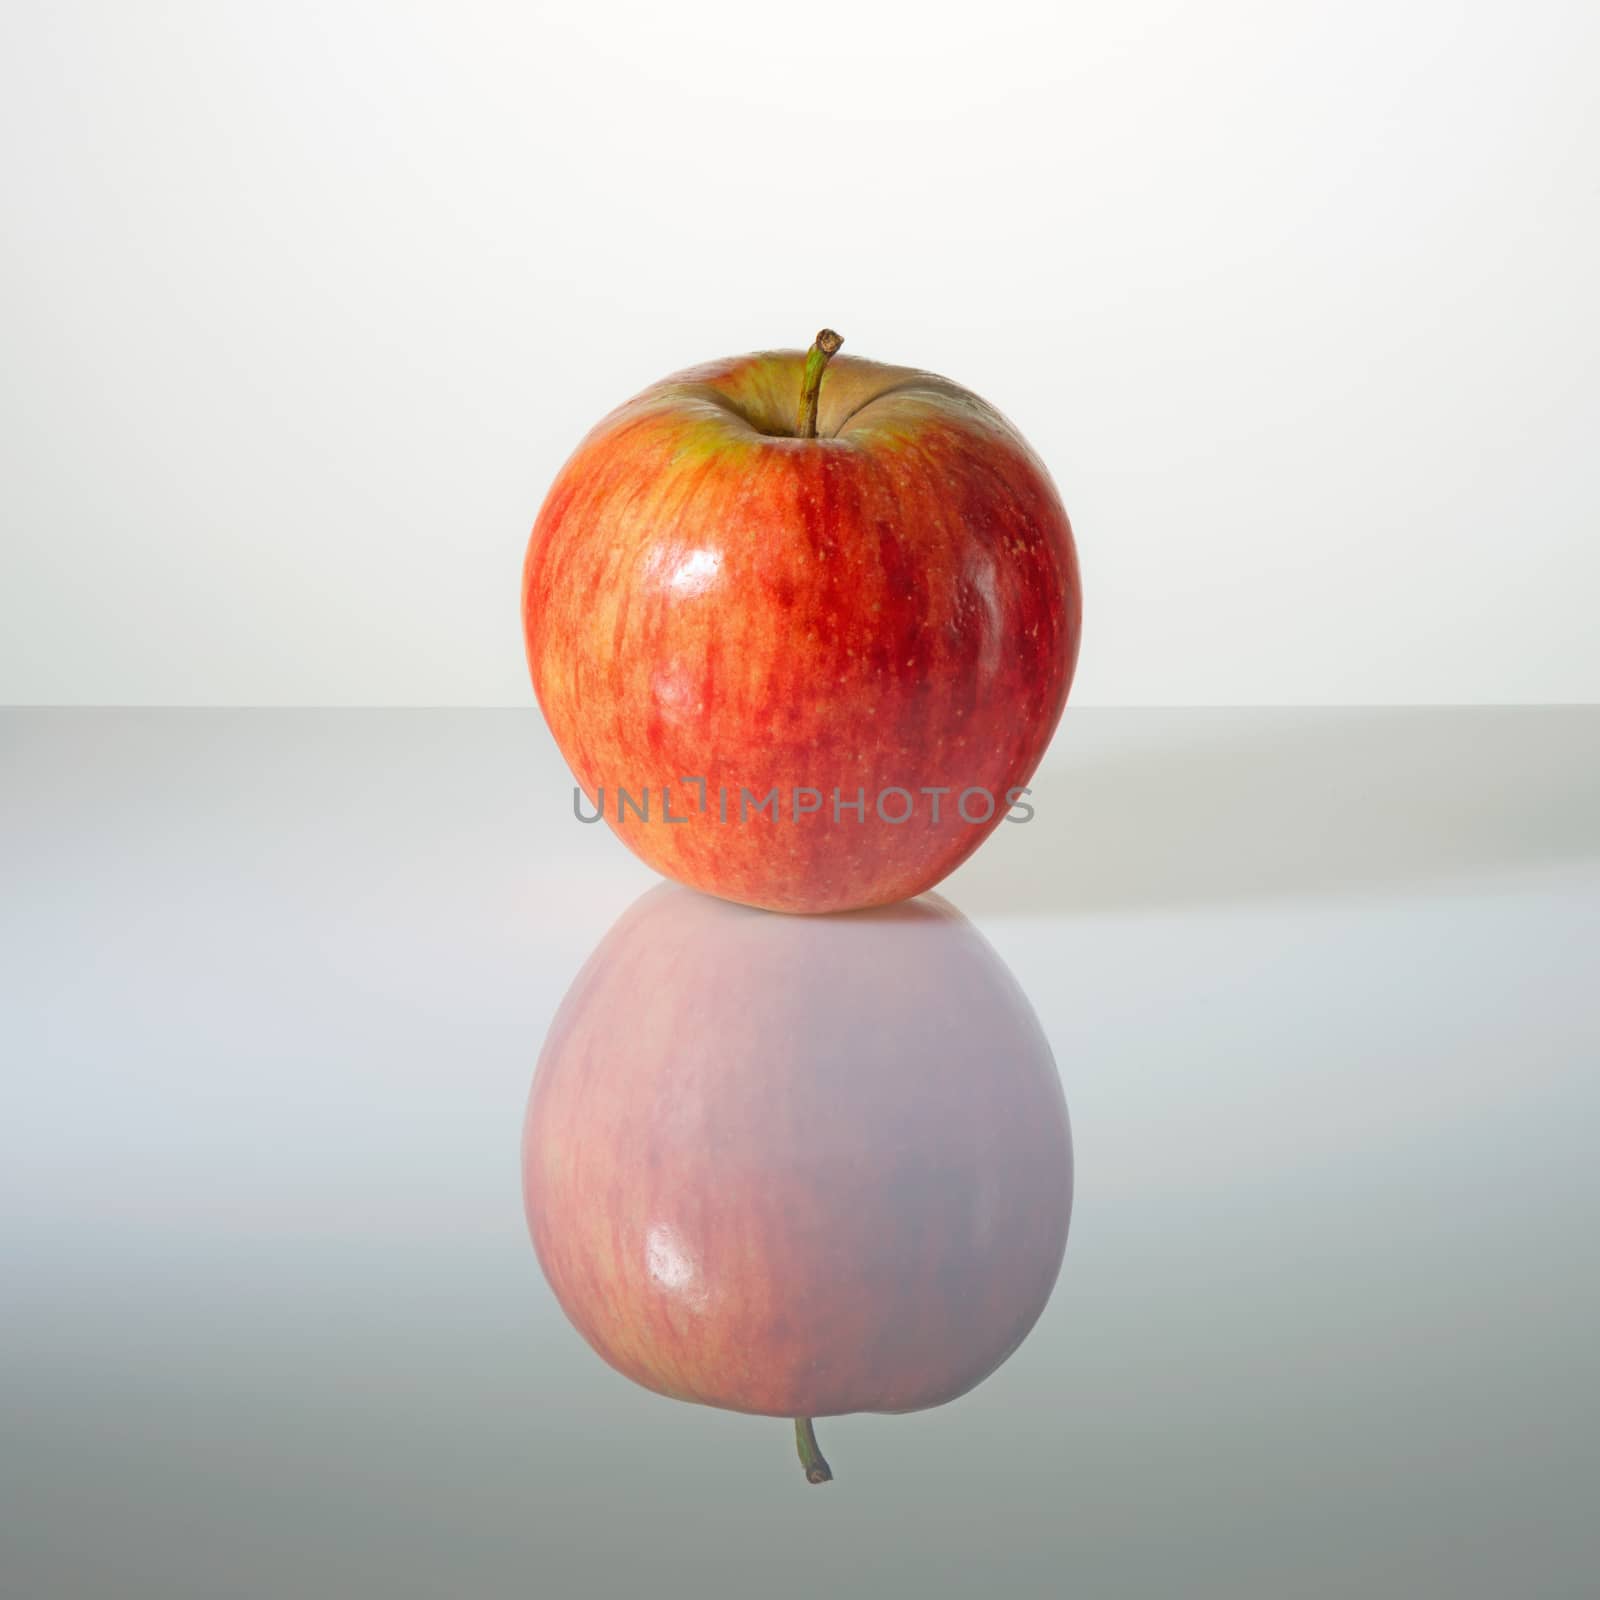 Red apple on a surface with reflection by fotooxotnik